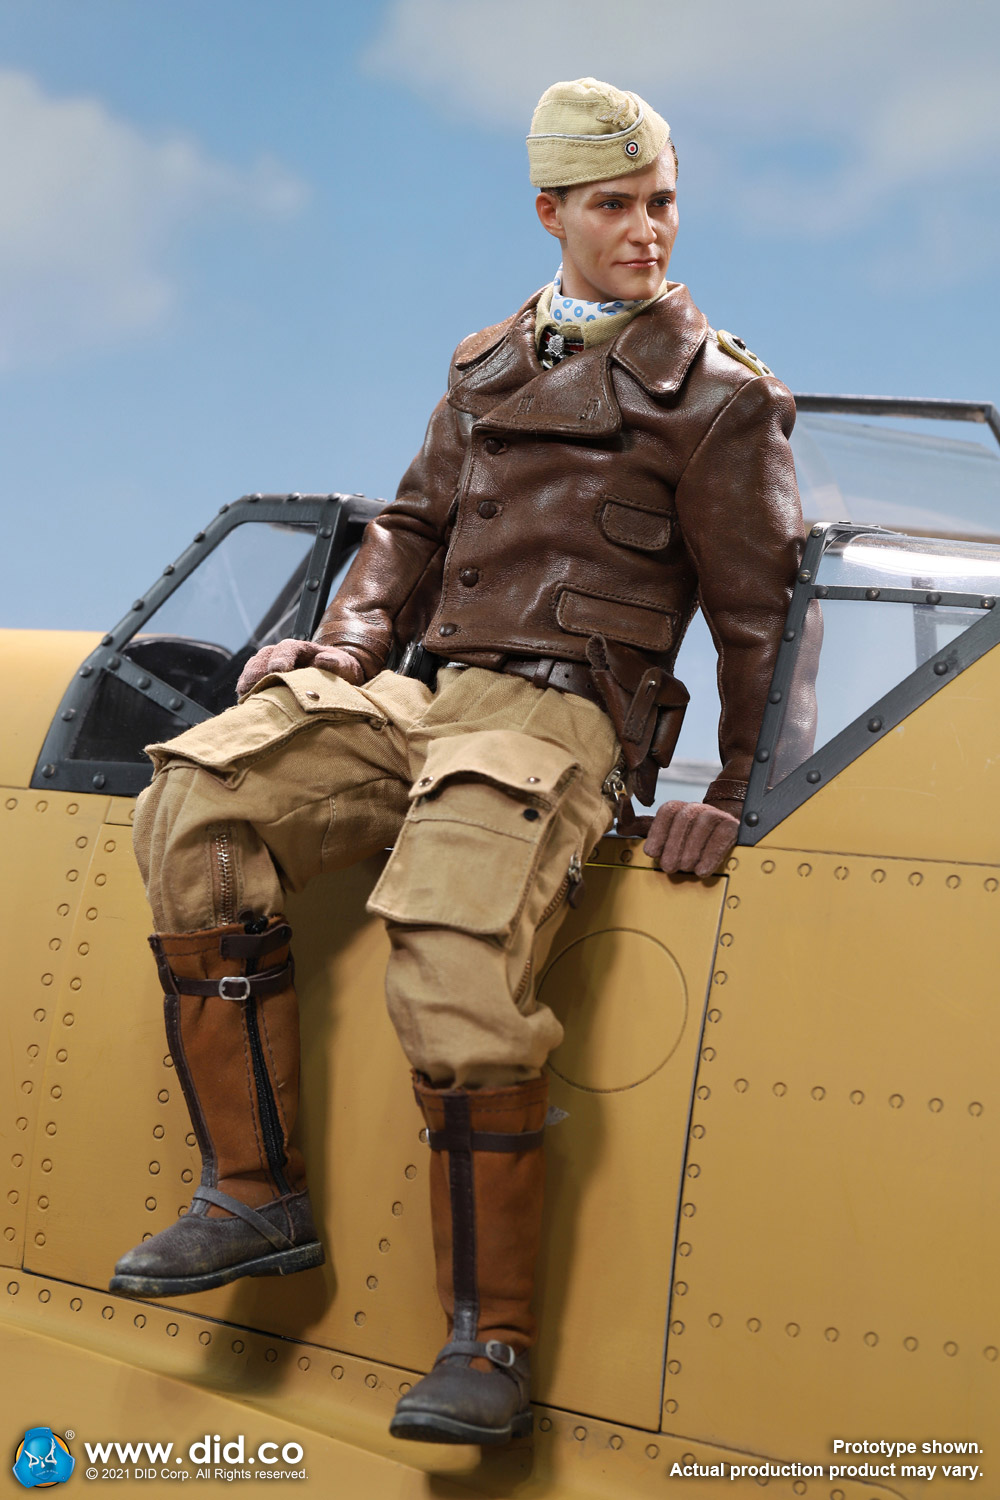 NEW PRODUCT: D80154 WWII German Luftwaffe Flying Ace “Star Of Africa” – Hans-Joachim Marseille & E60060  Diorama Of “Star Of Africa” 18243